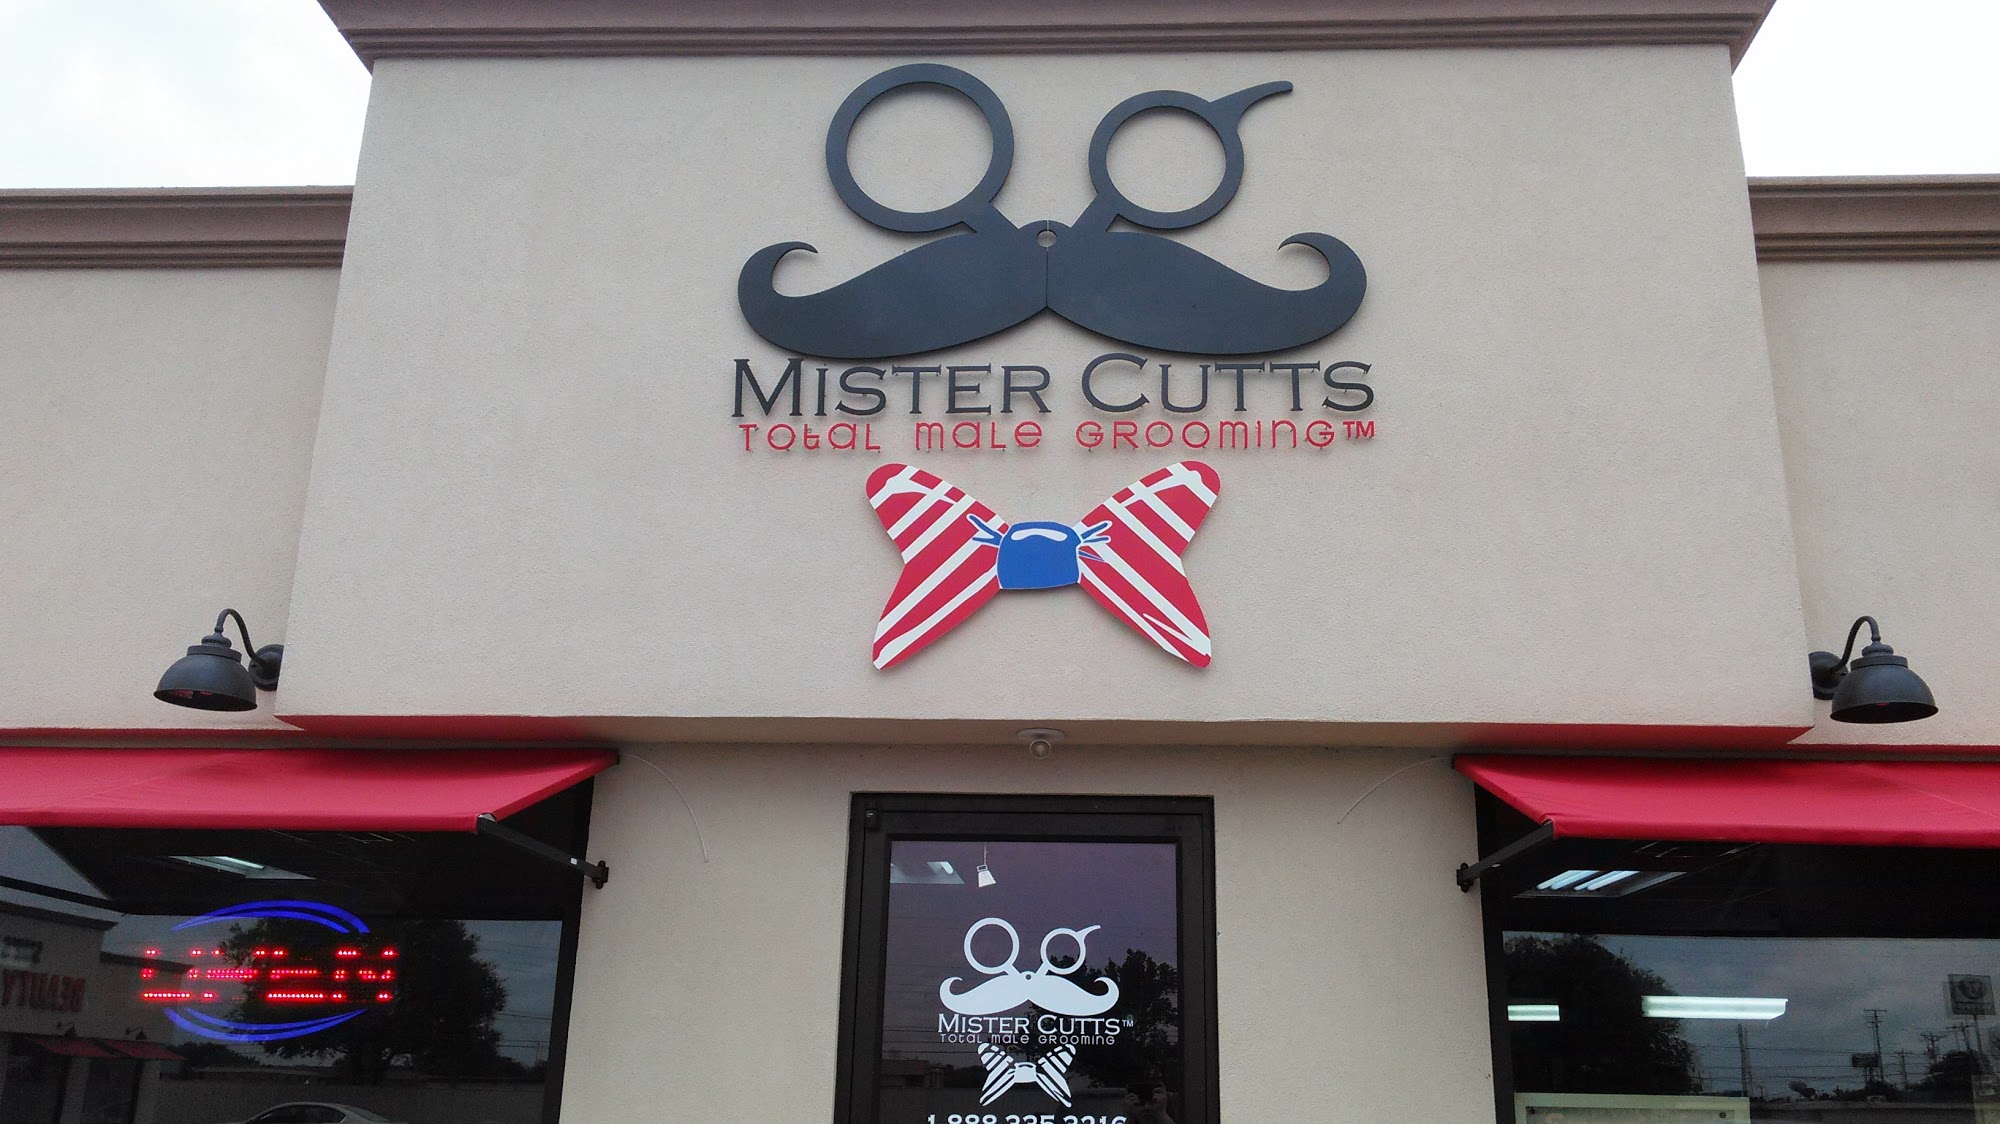 Mister Cutts Total Male Grooming